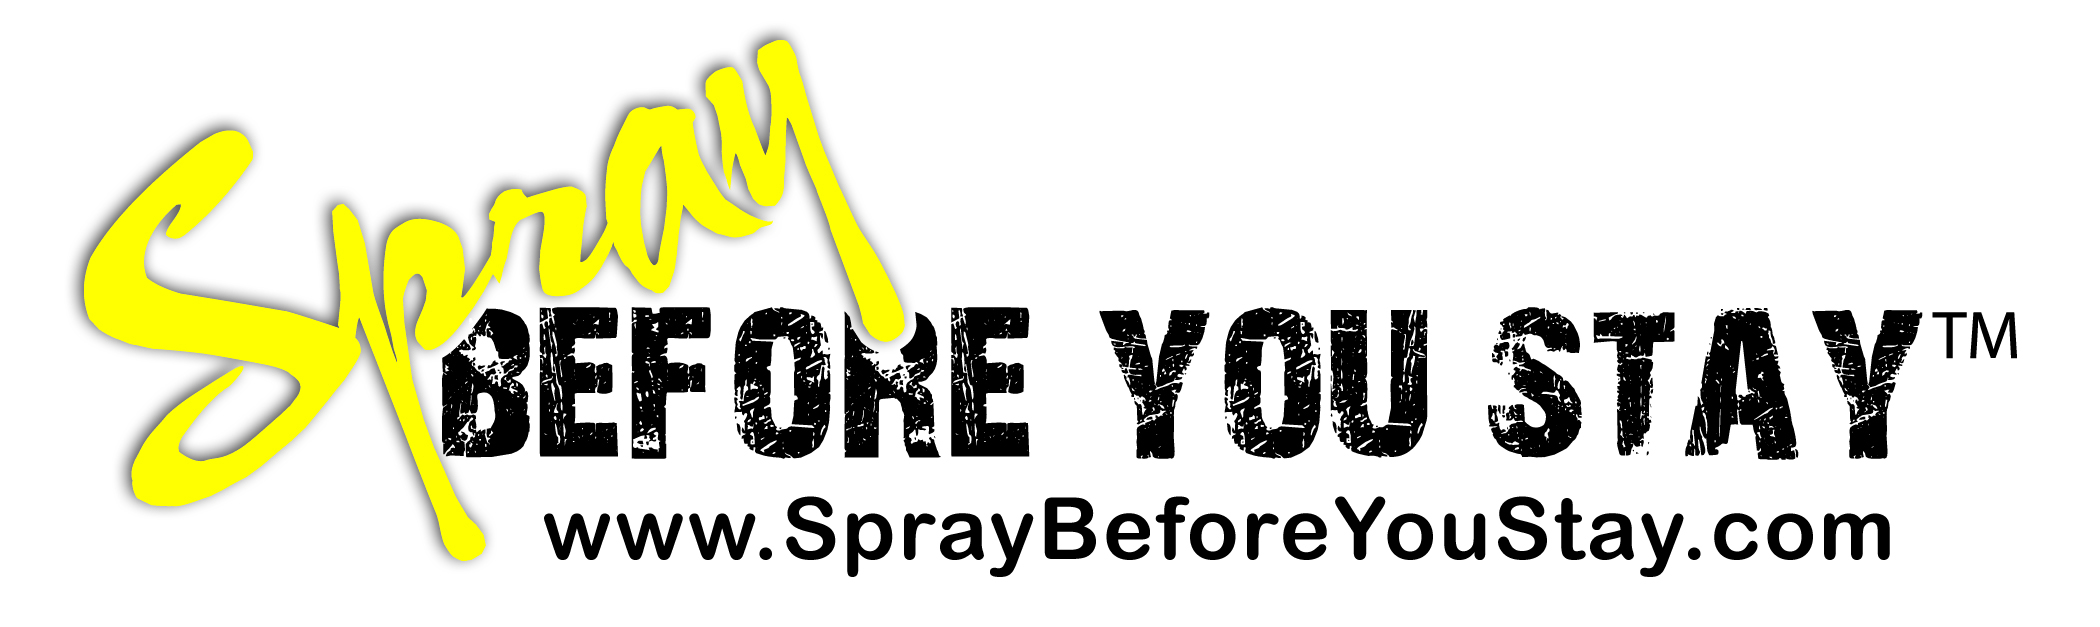 Spray Before You Stay